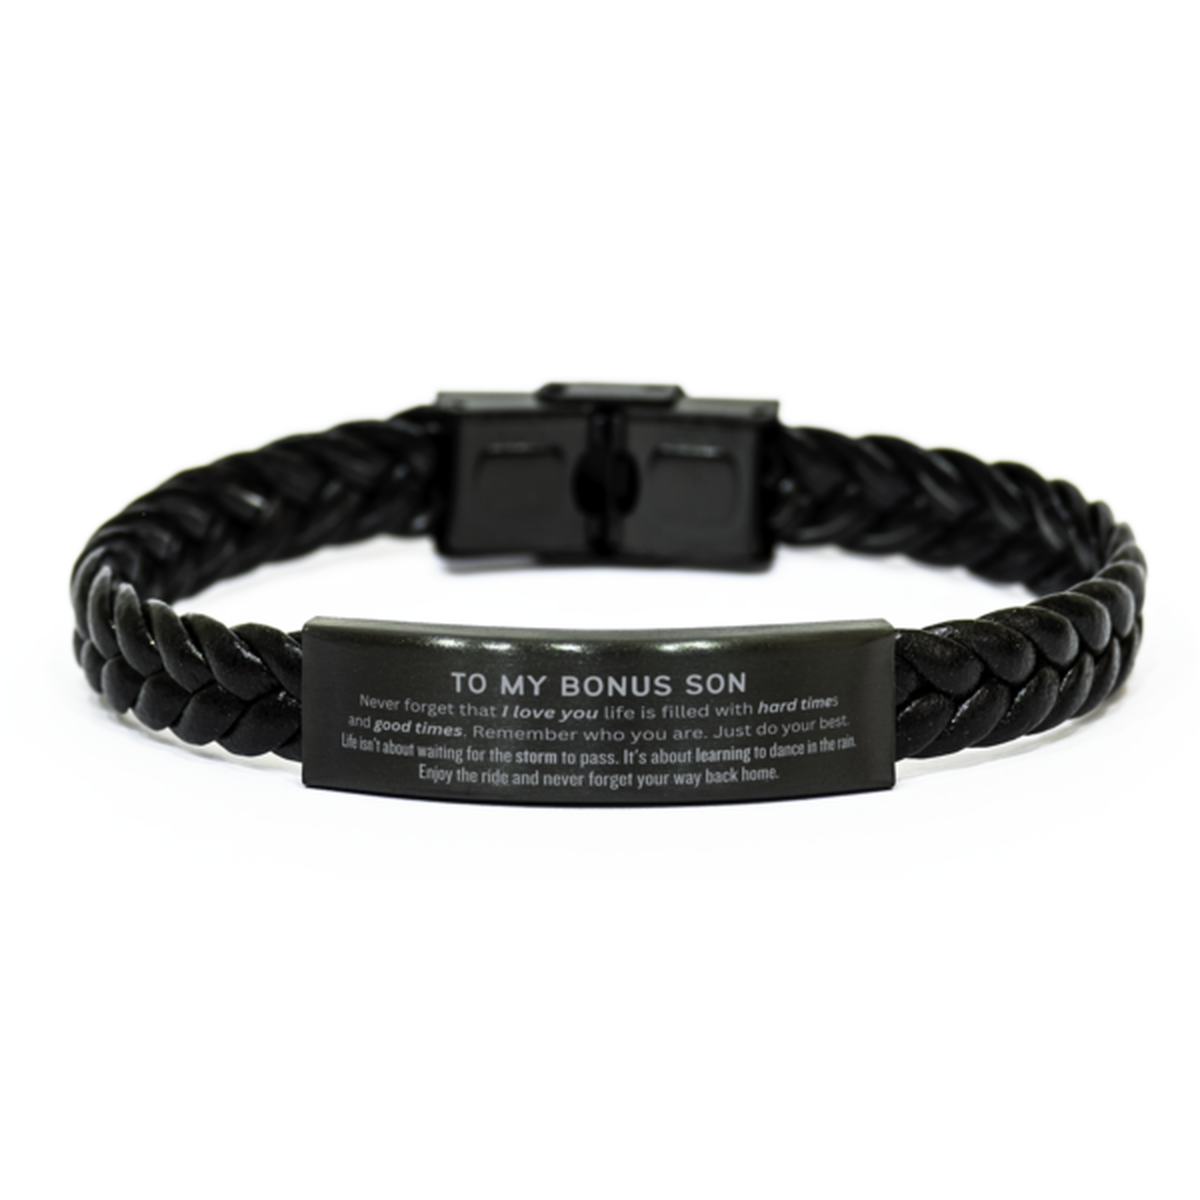 Christmas Bonus Son Braided Leather Bracelet Gifts, To My Bonus Son Birthday Thank You Gifts For Bonus Son, Graduation Unique Gifts For Bonus Son To My Bonus Son Never forget that I love you life is filled with hard times and good times. Remember who you